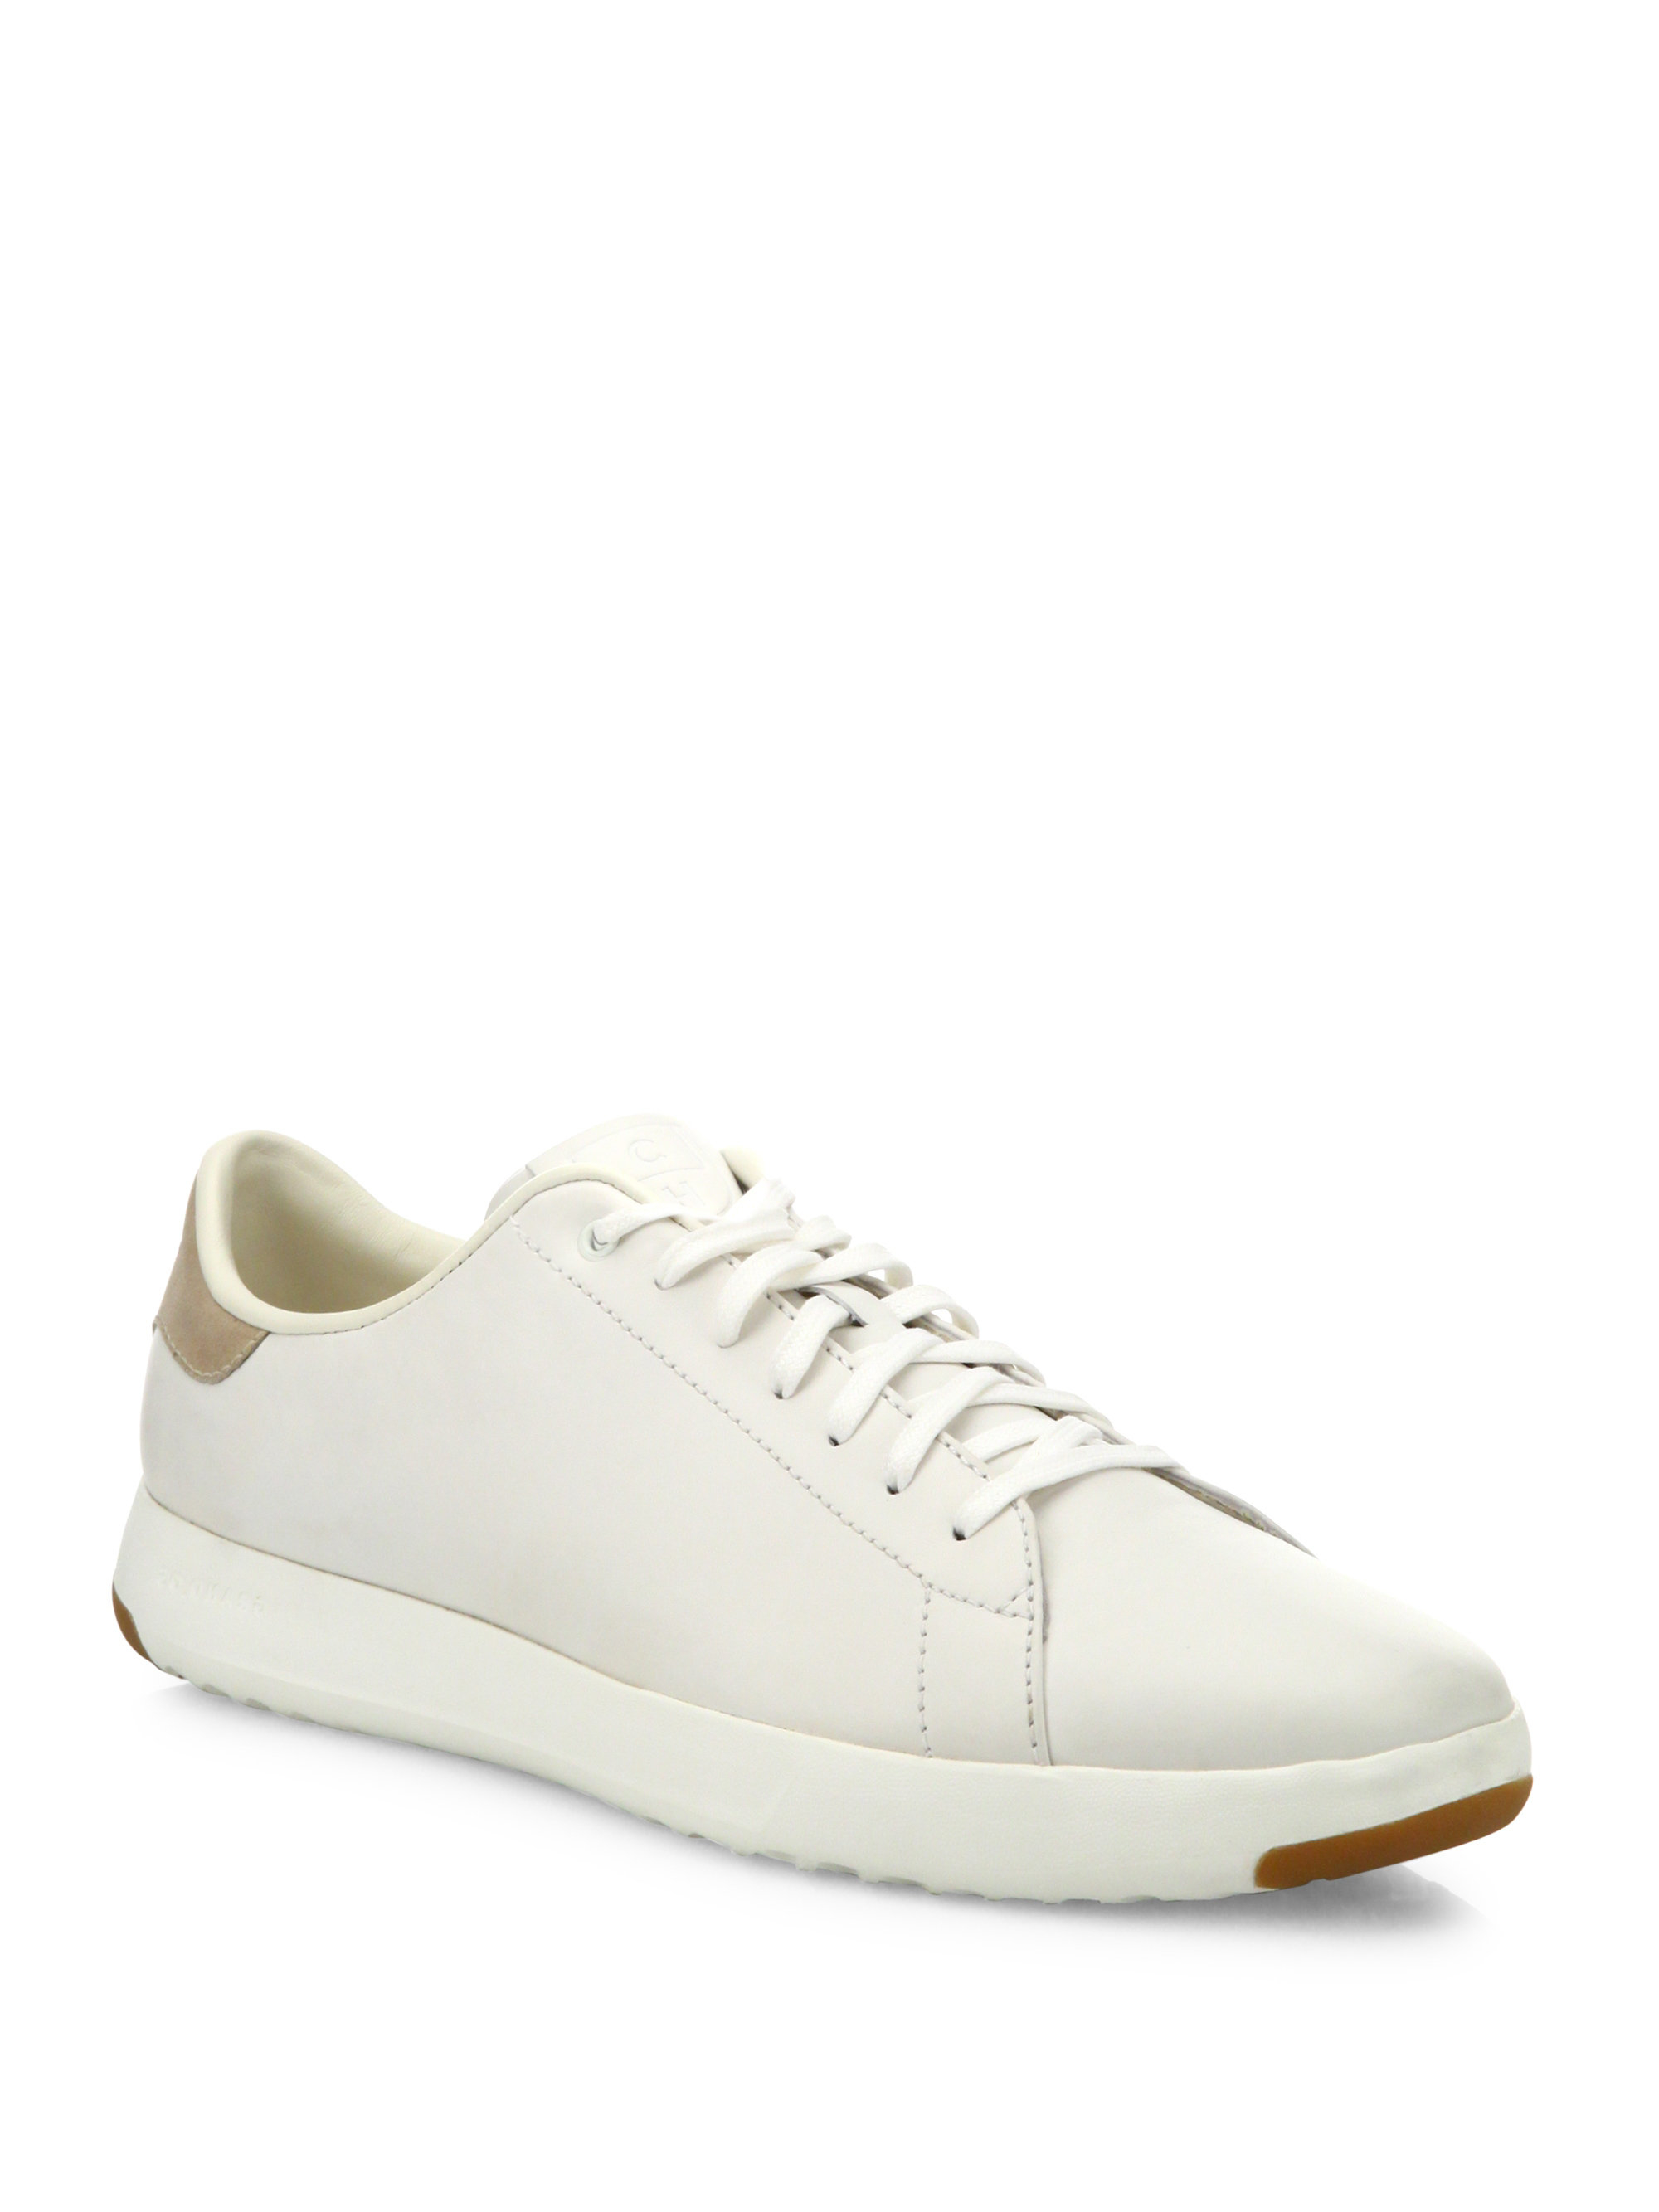 Cole haan Grandpro Tennis Leather Sneakers in White for Men | Lyst